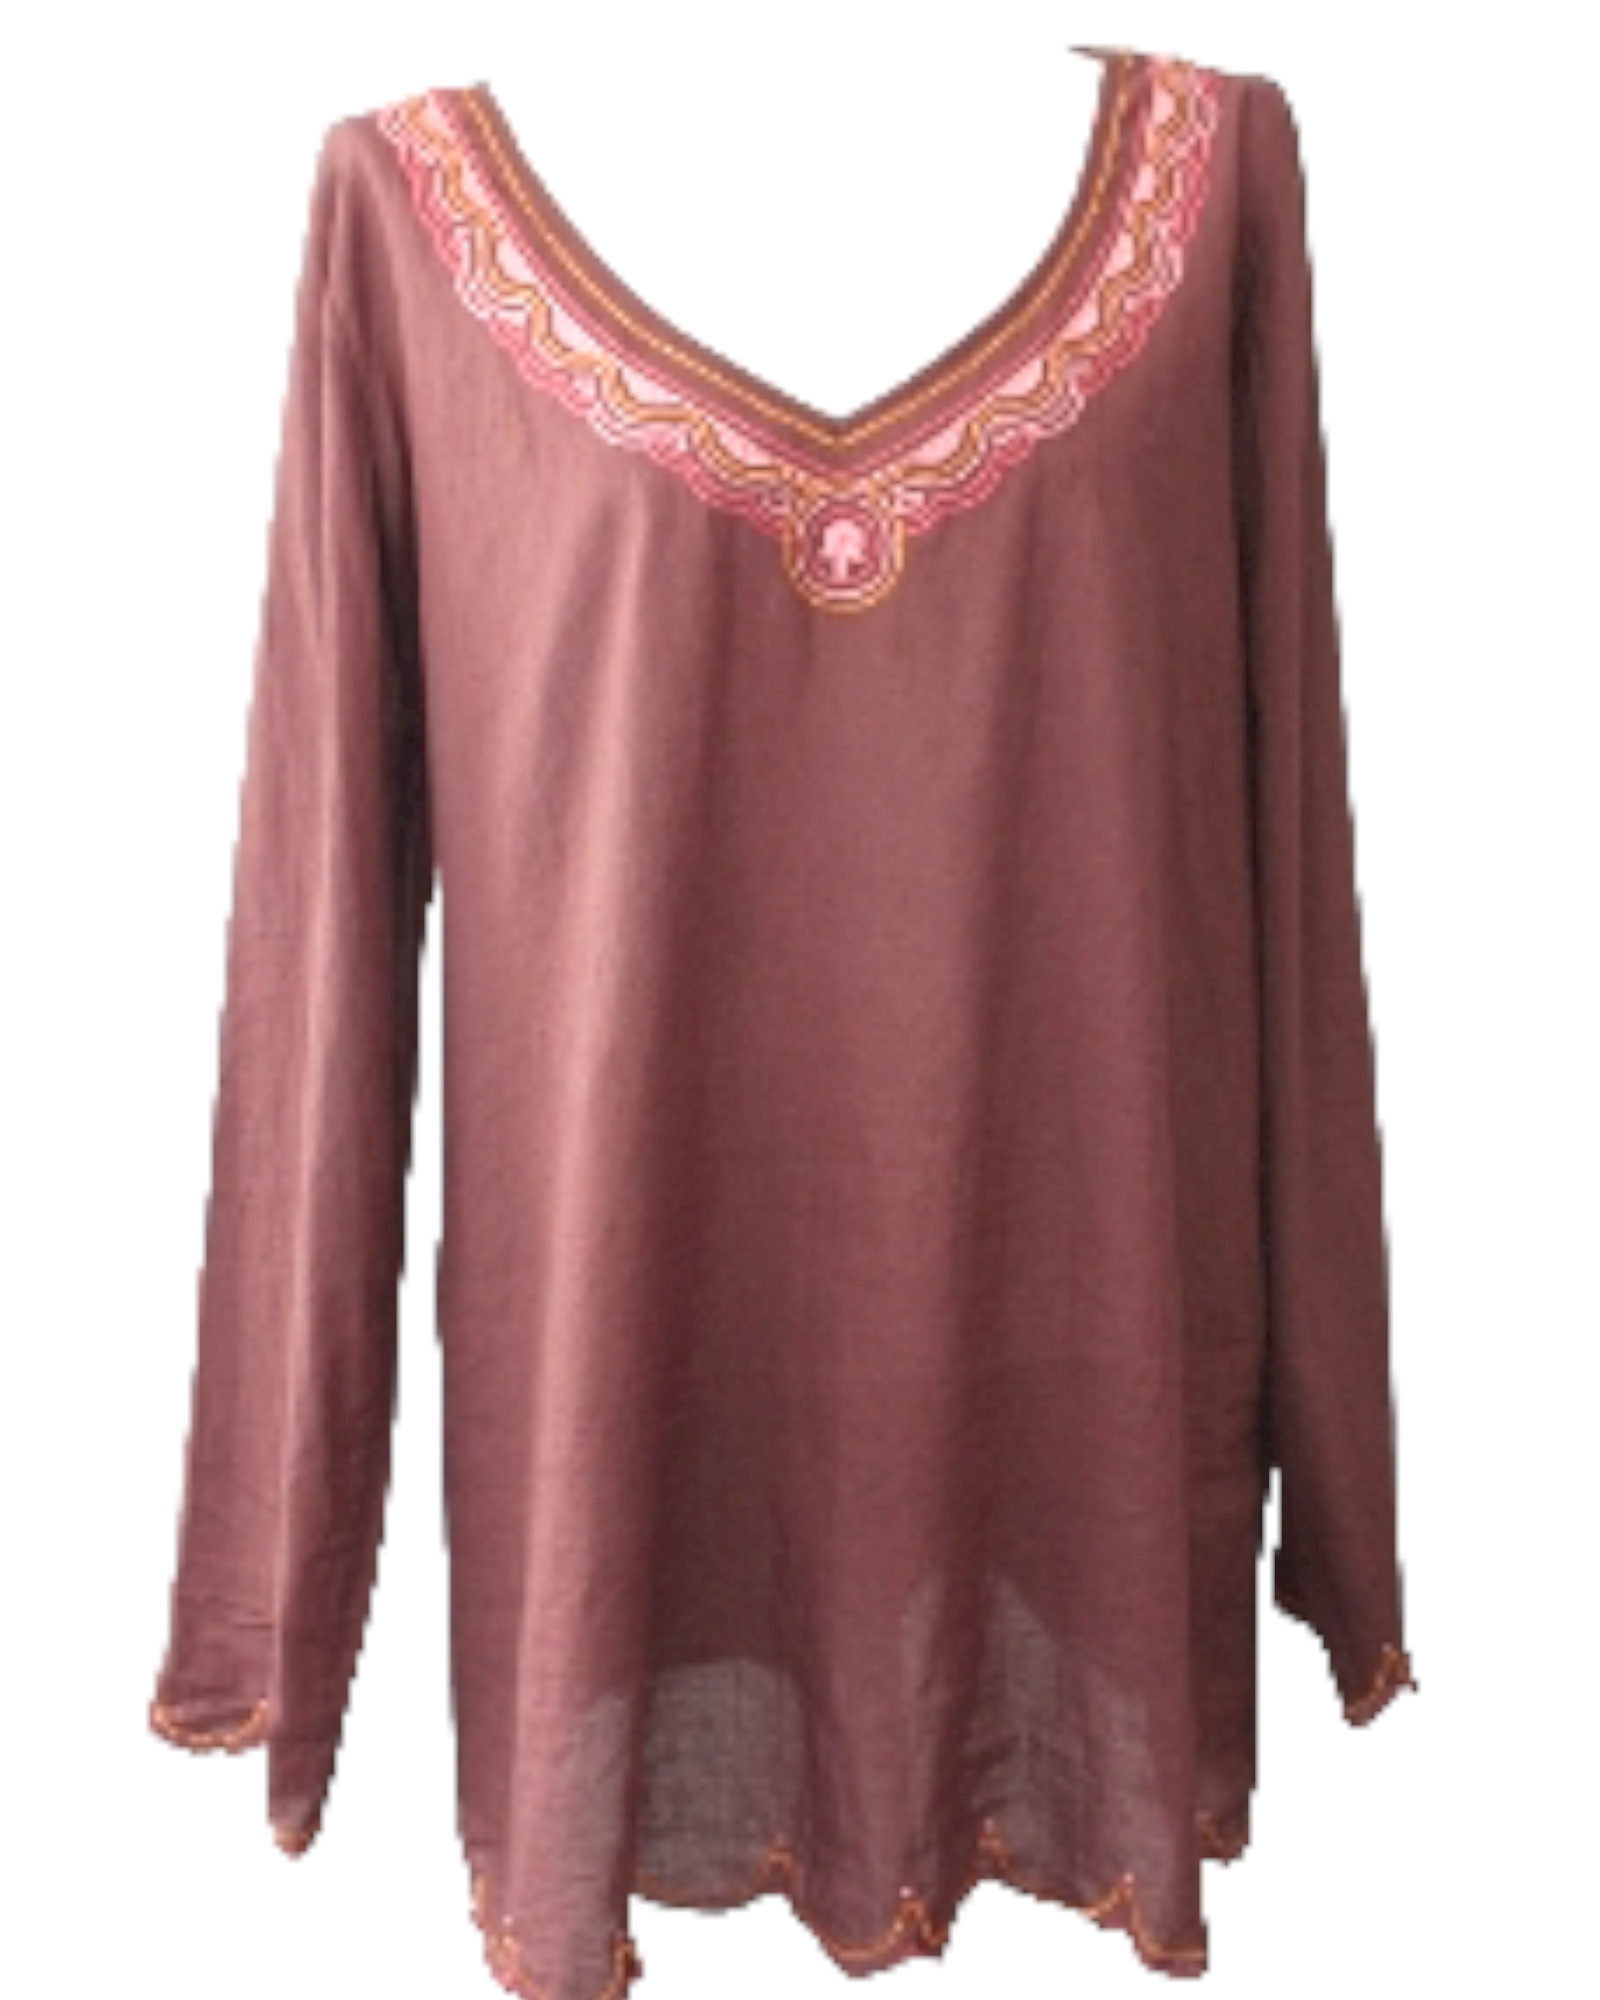 Warm Spring LUCKY BRAND embroidered tunic